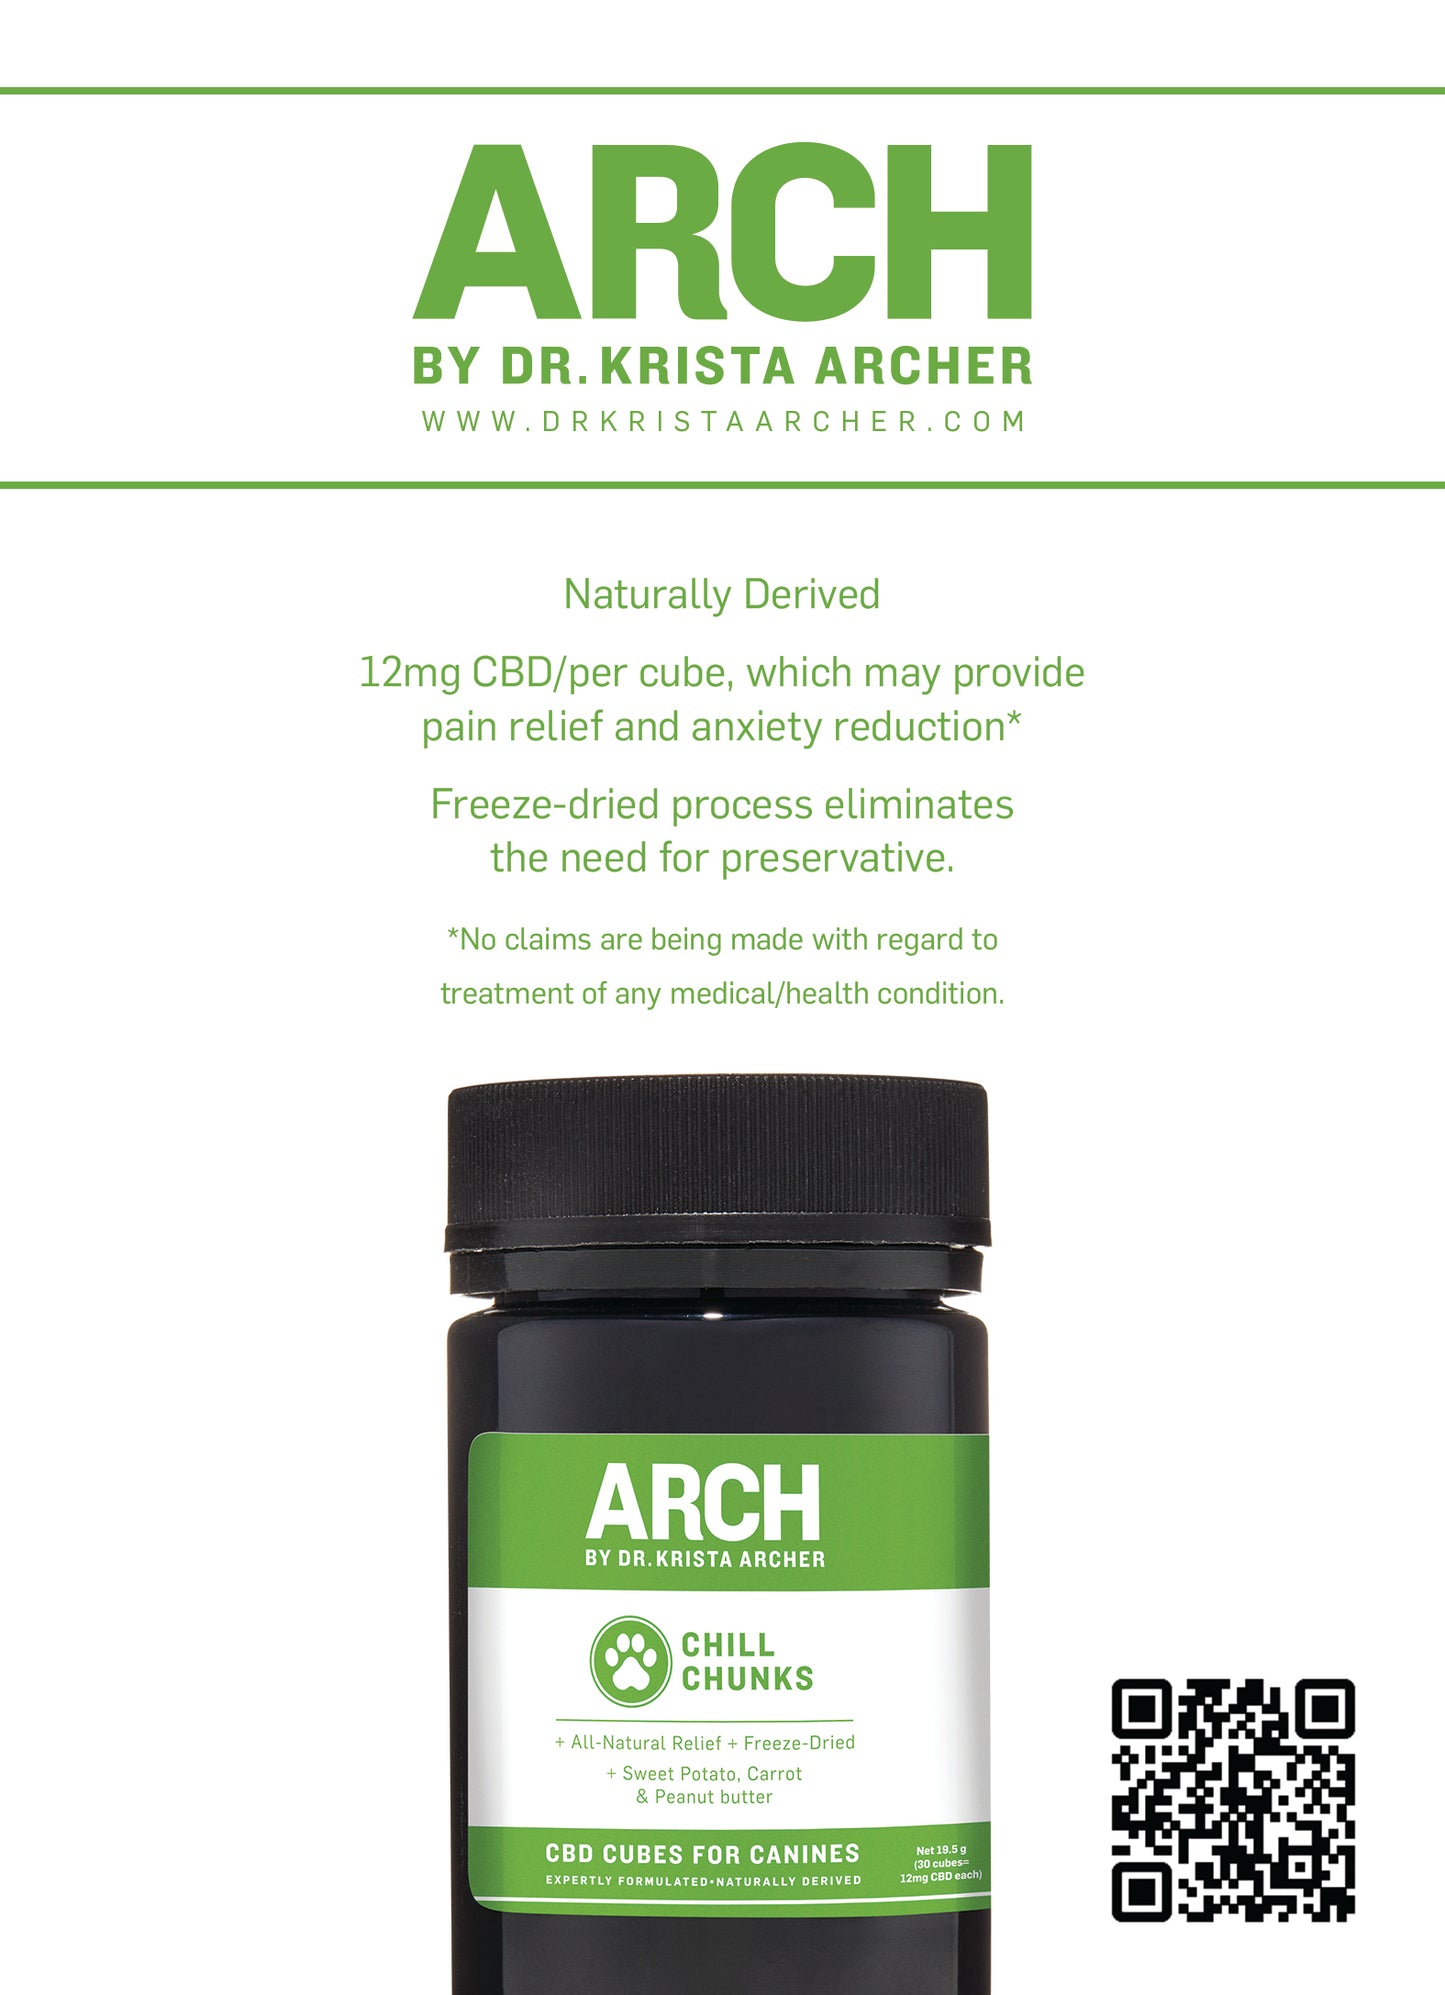 ARCH CBD Chill Chunks for Canines – 1.7 oz